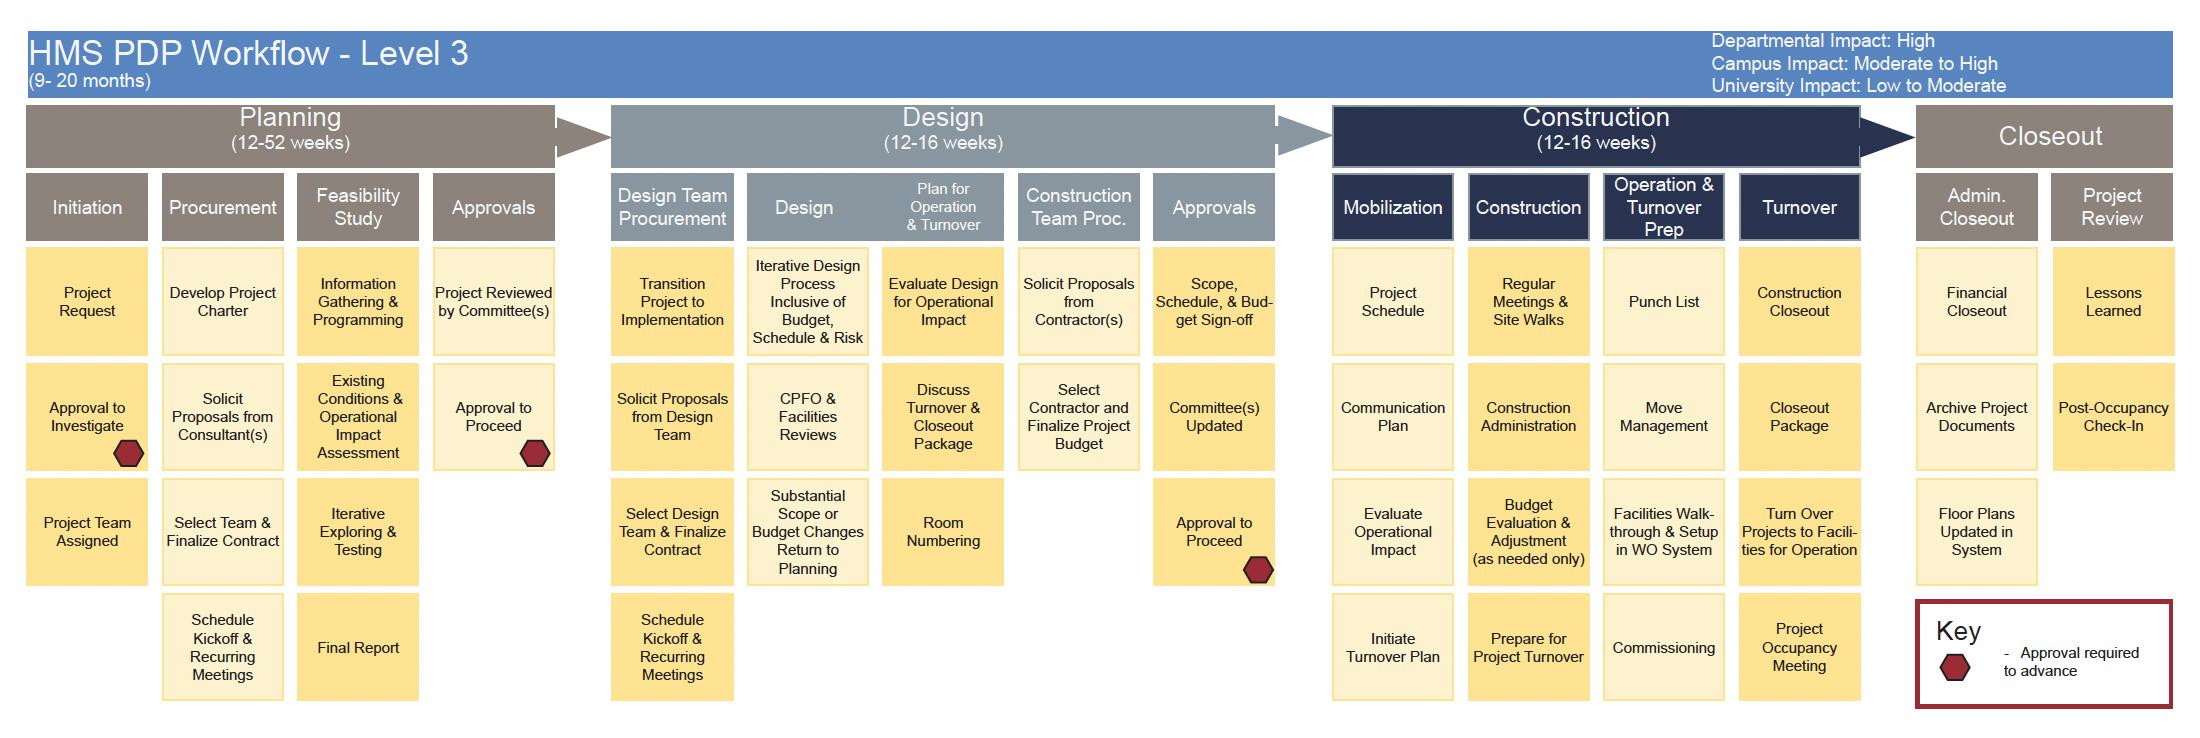 HMS PDP Workflow Level 3